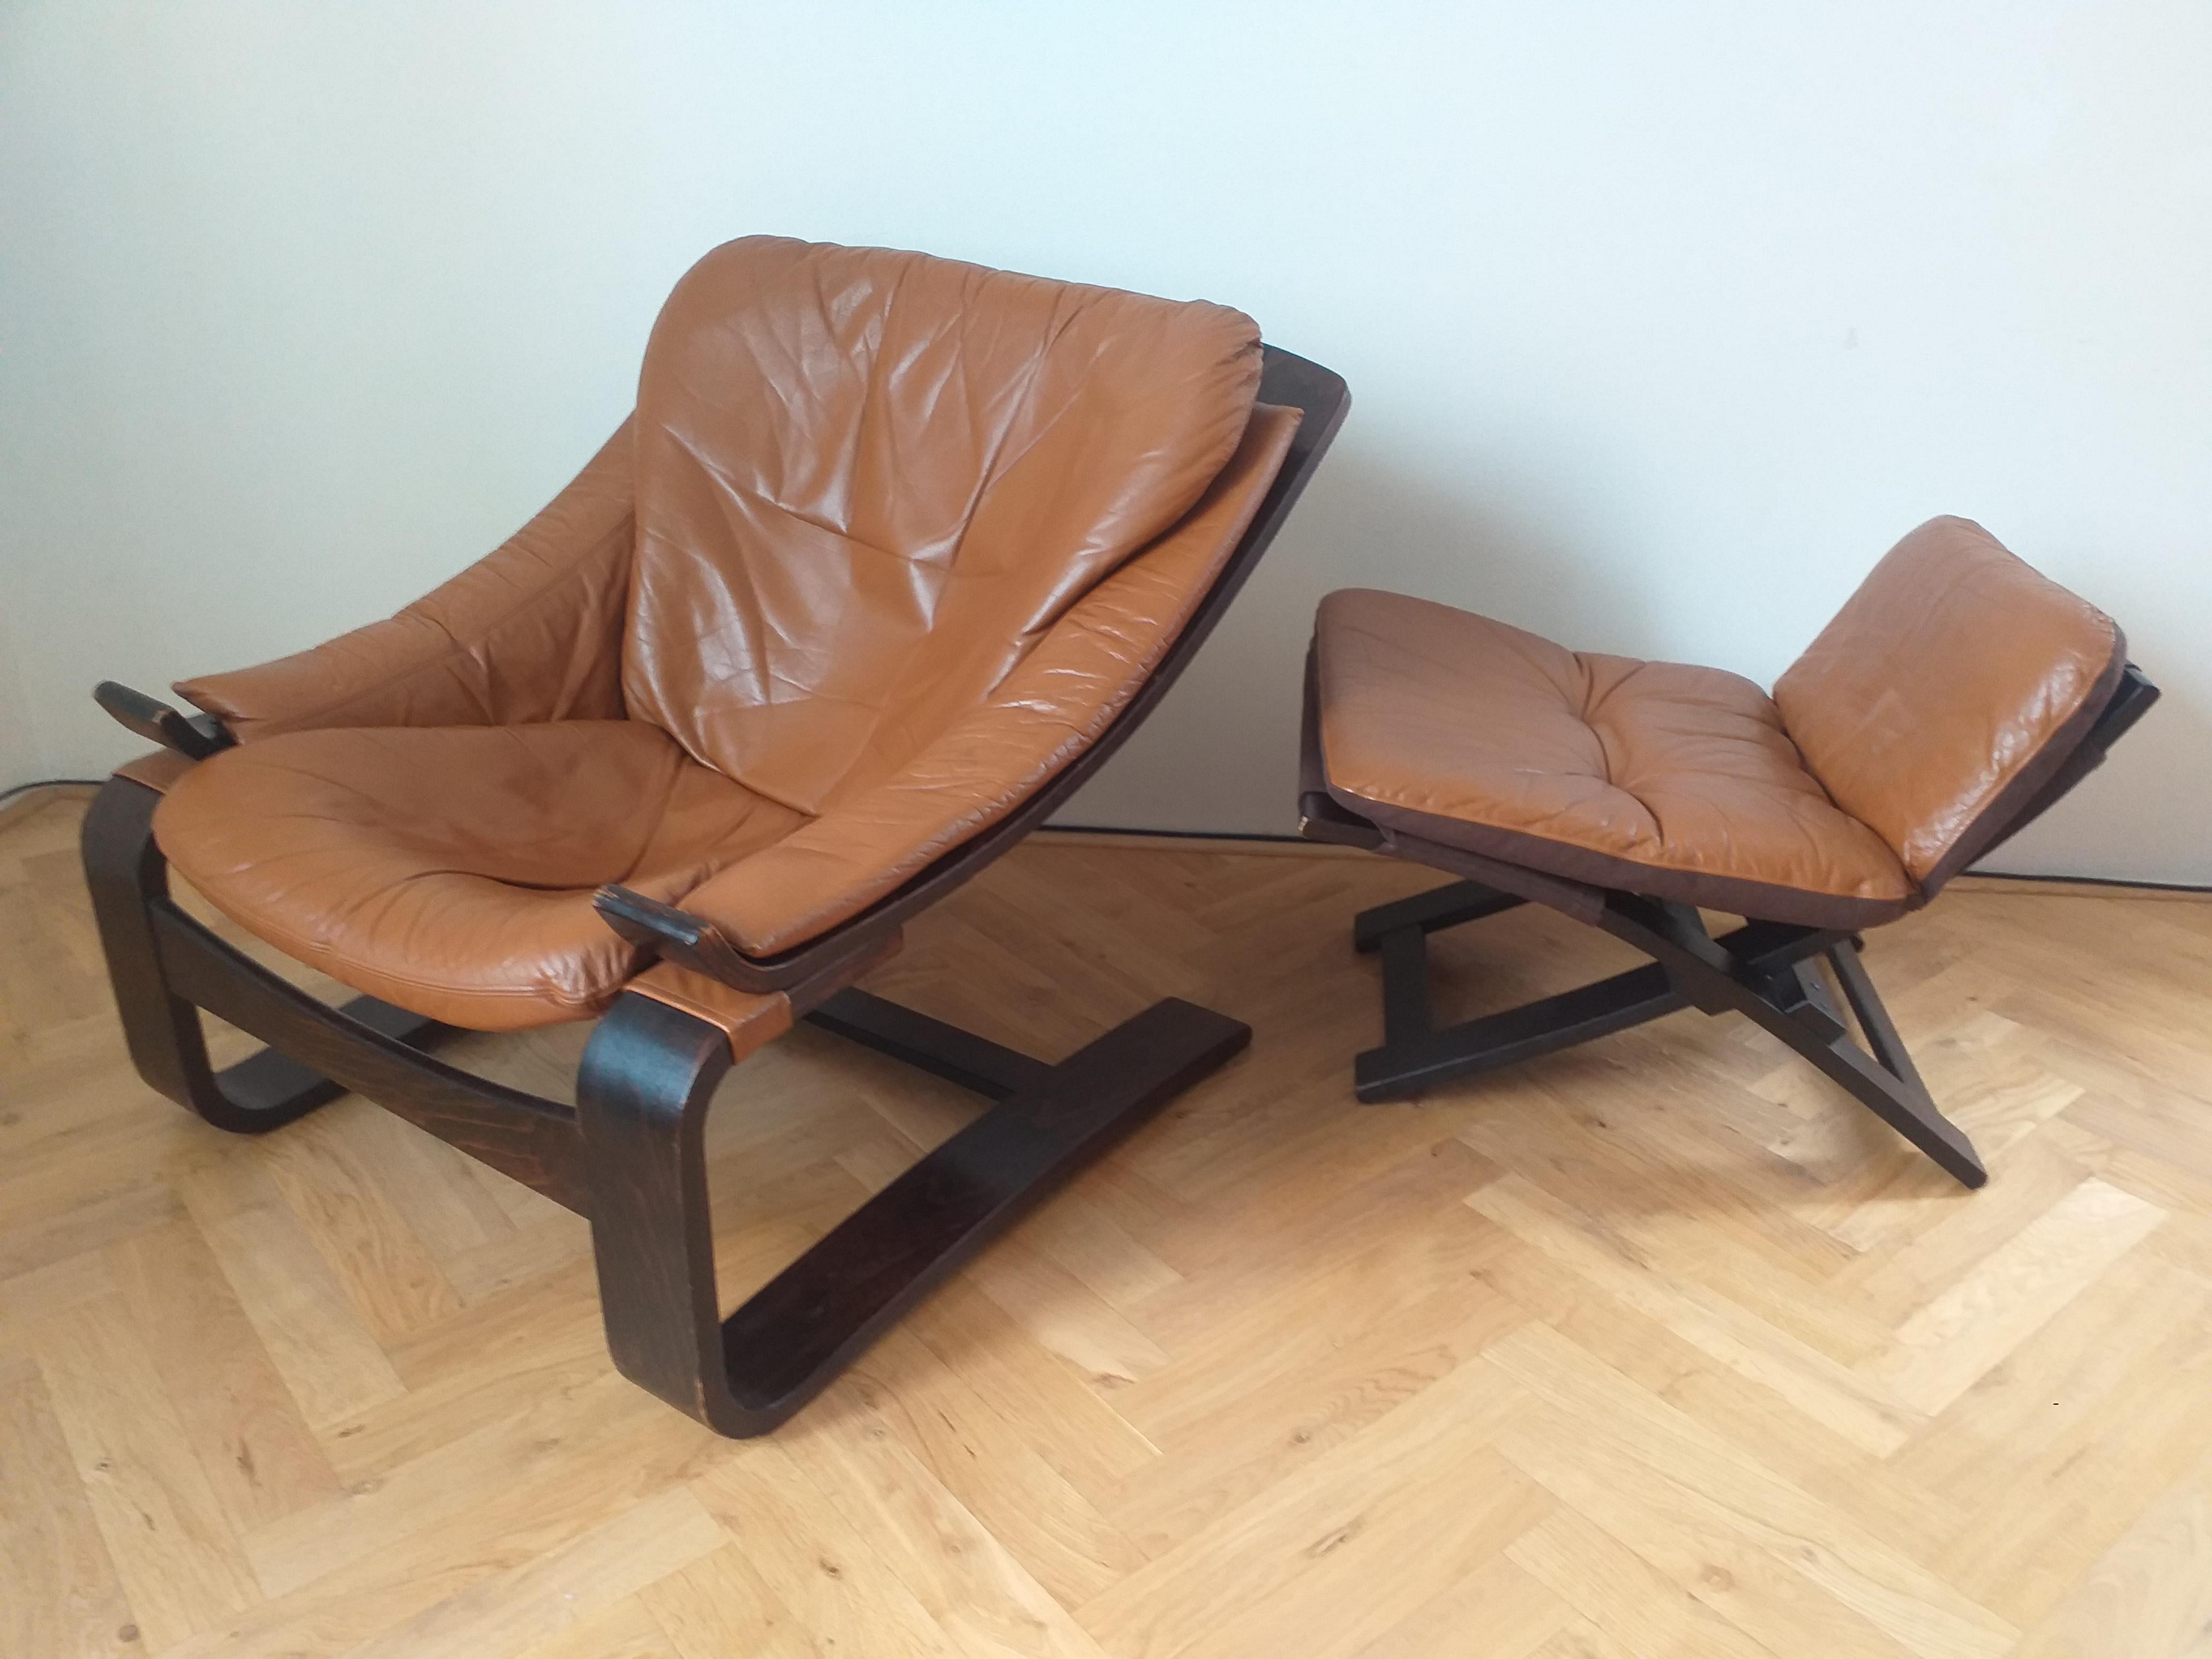 Leather Midcentury Lounge Chair Kroken with Ottoman, Ake Fribytter, Nelo, Sweden, 1970s For Sale